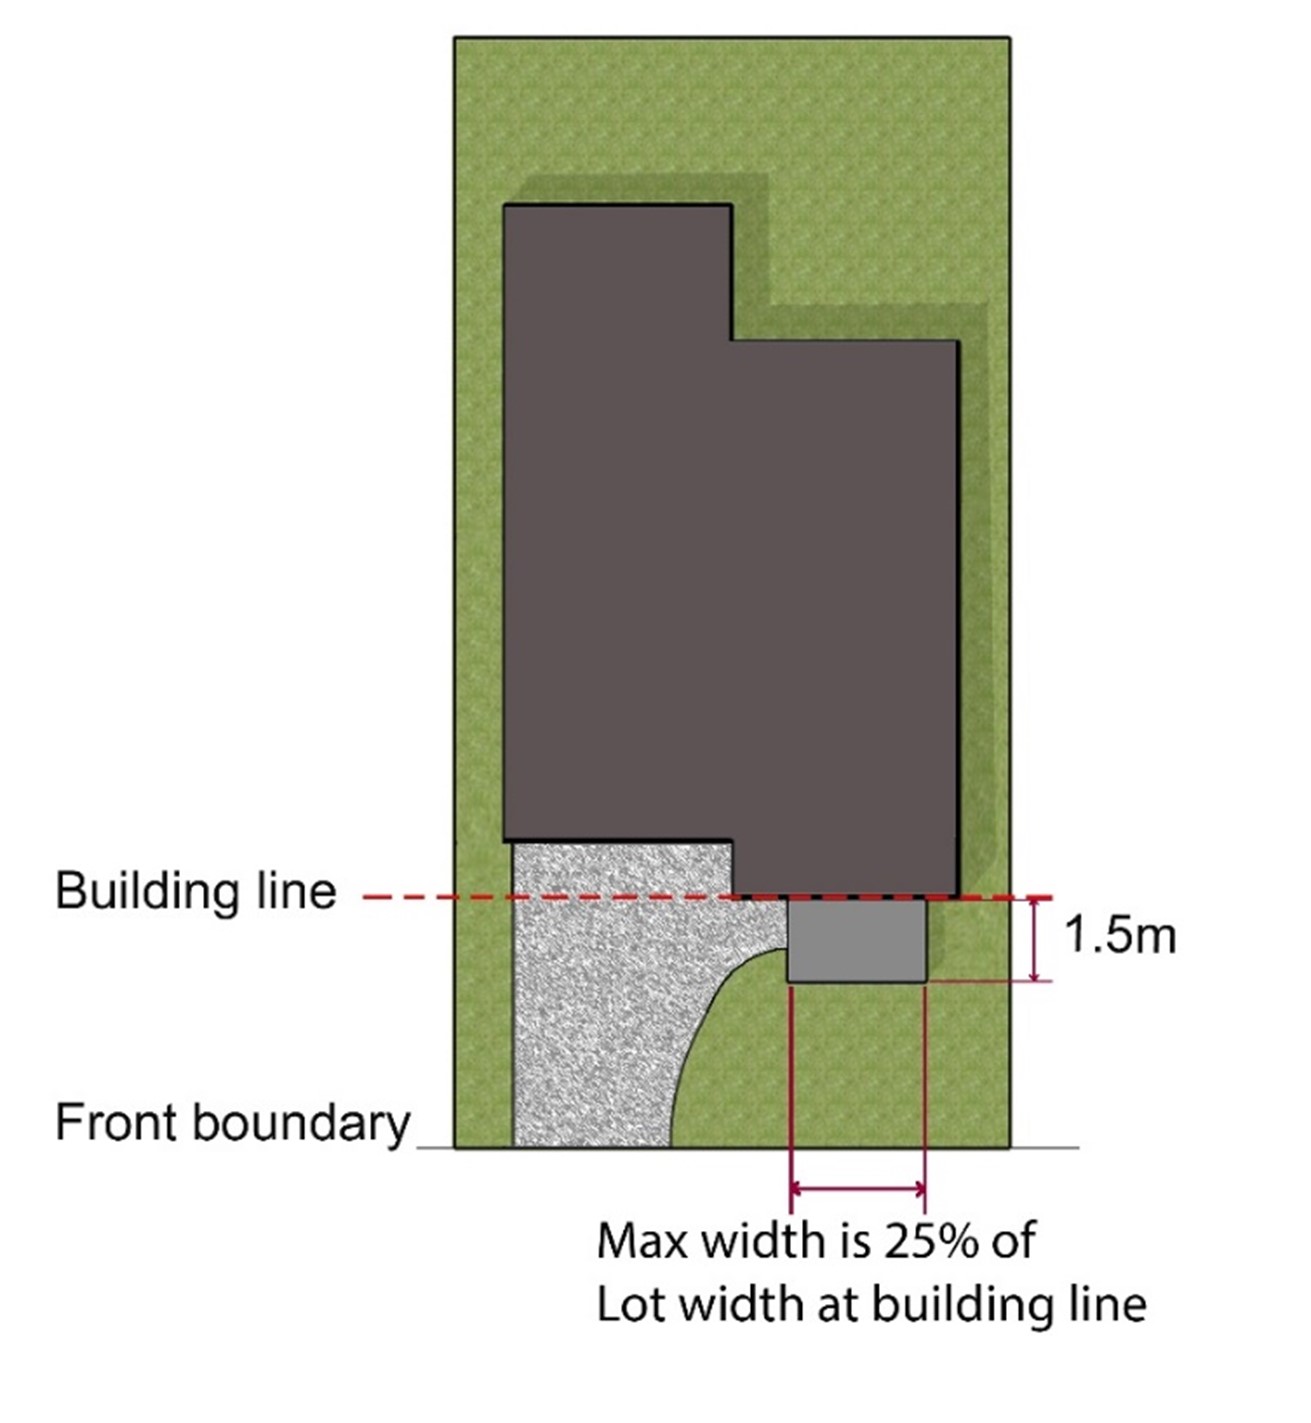 Figure D2.03: Aerial view of building articulation zone